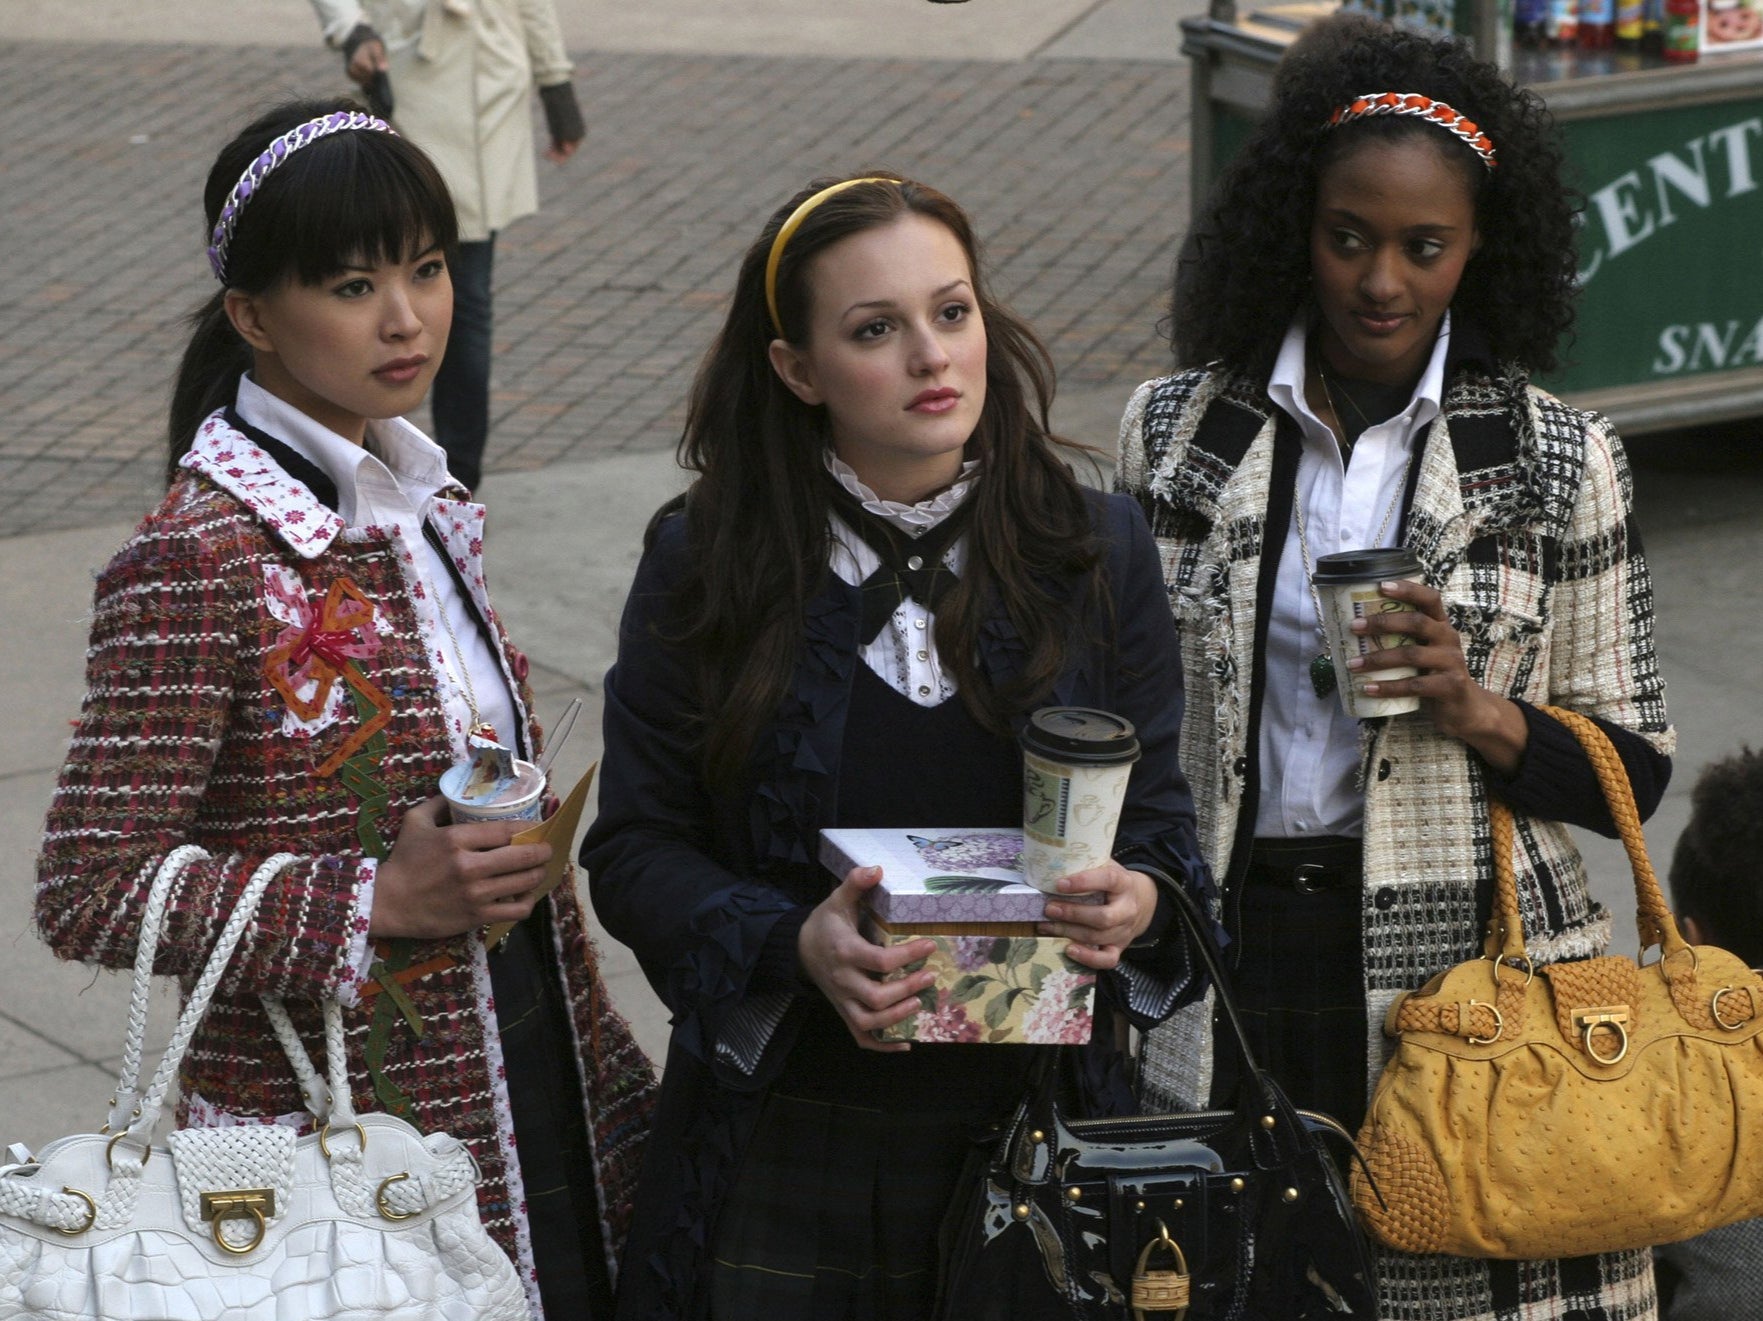 HBO Max is rebooting ‘Gossip Girl’ and taking the original seasons with it